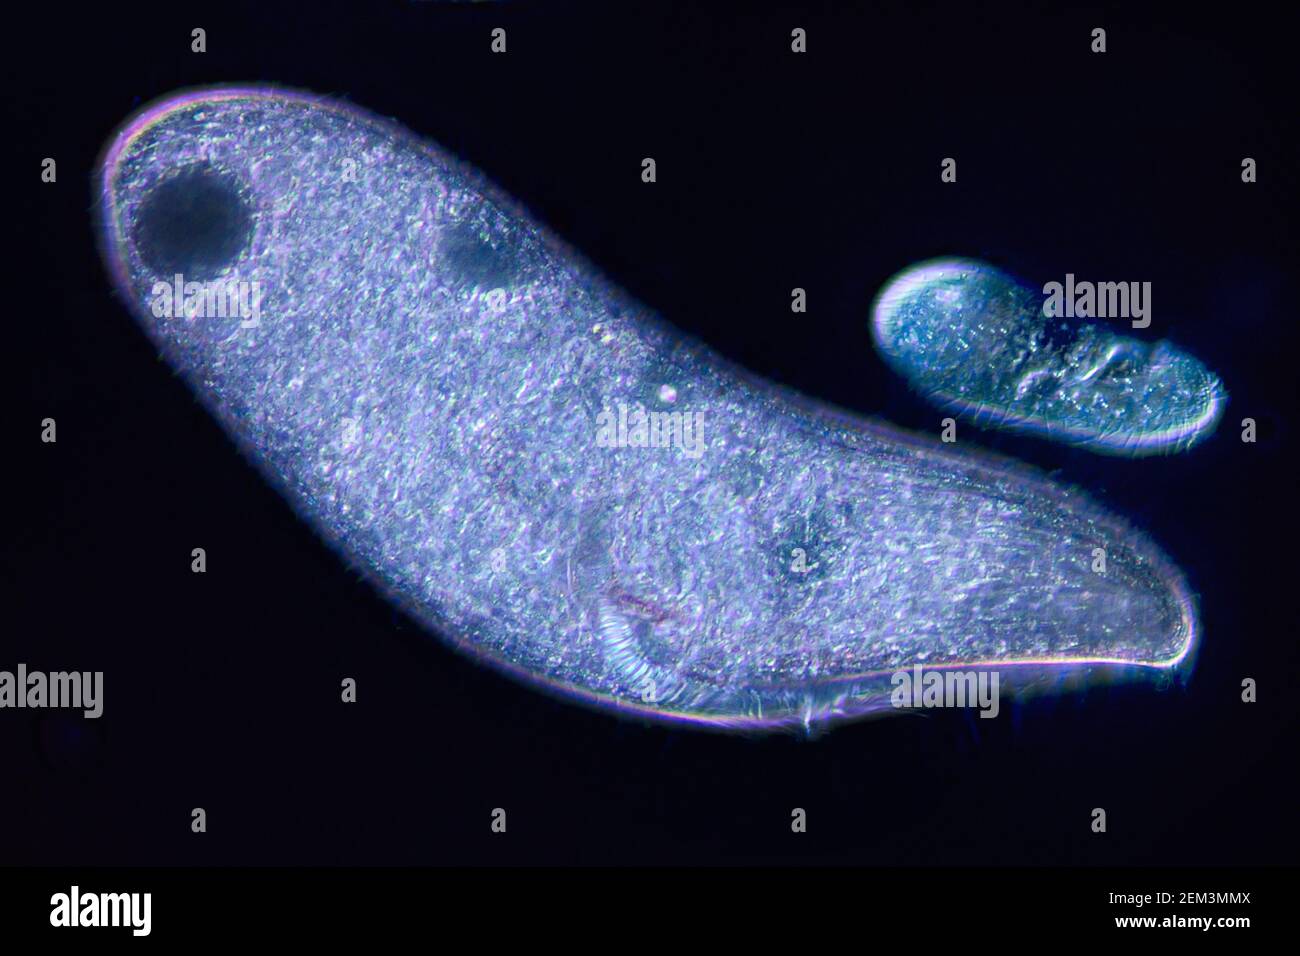 ciliates (Blepharisma americana), dark field microscopic image, magnification x32 related to 35 mm Stock Photo